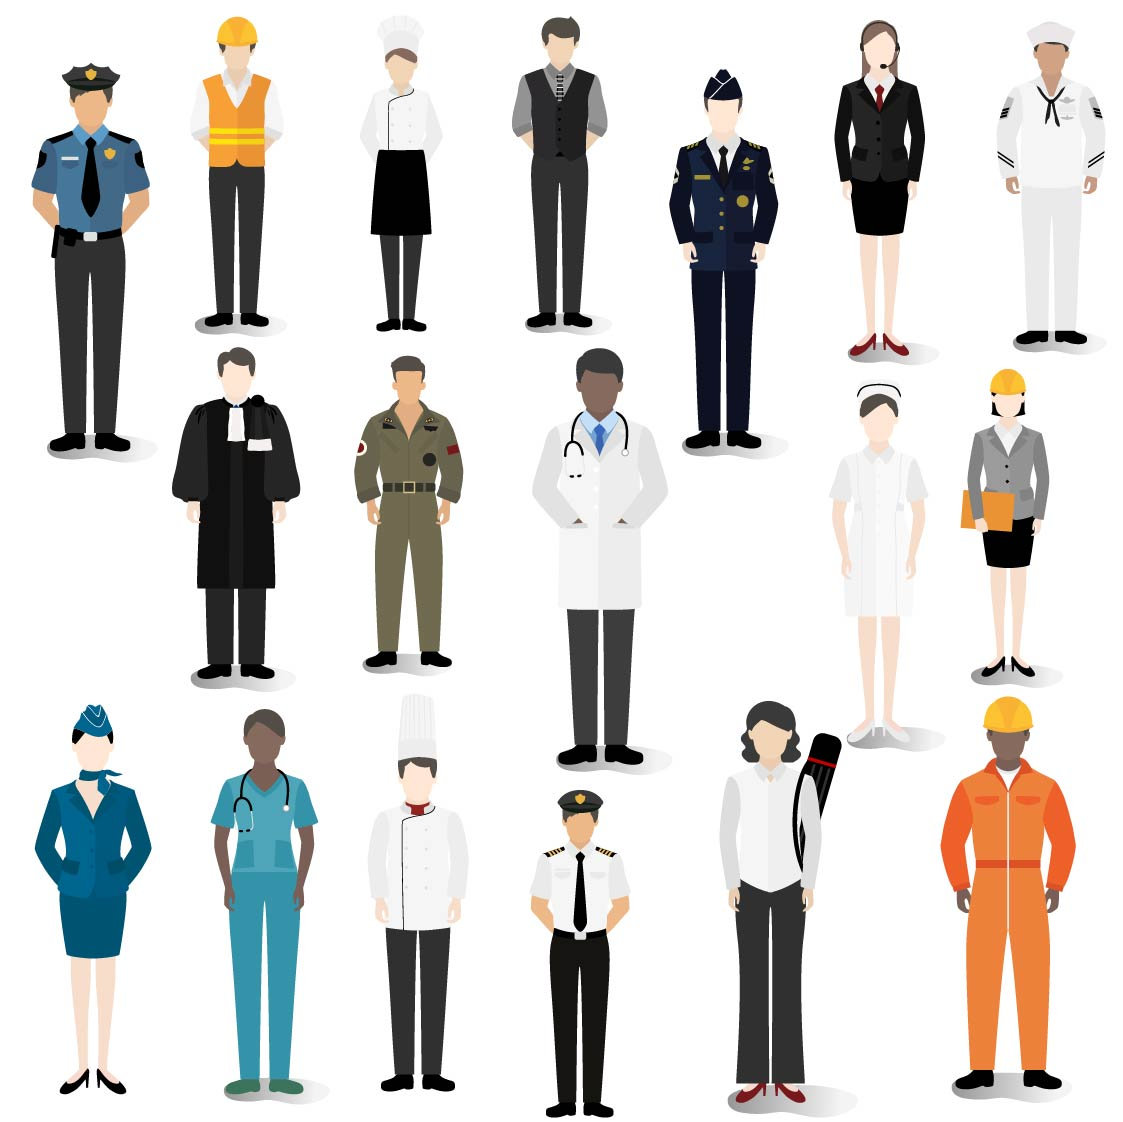 Occupations Clipart Professions Workers Clipart (Instant Download) - Etsy